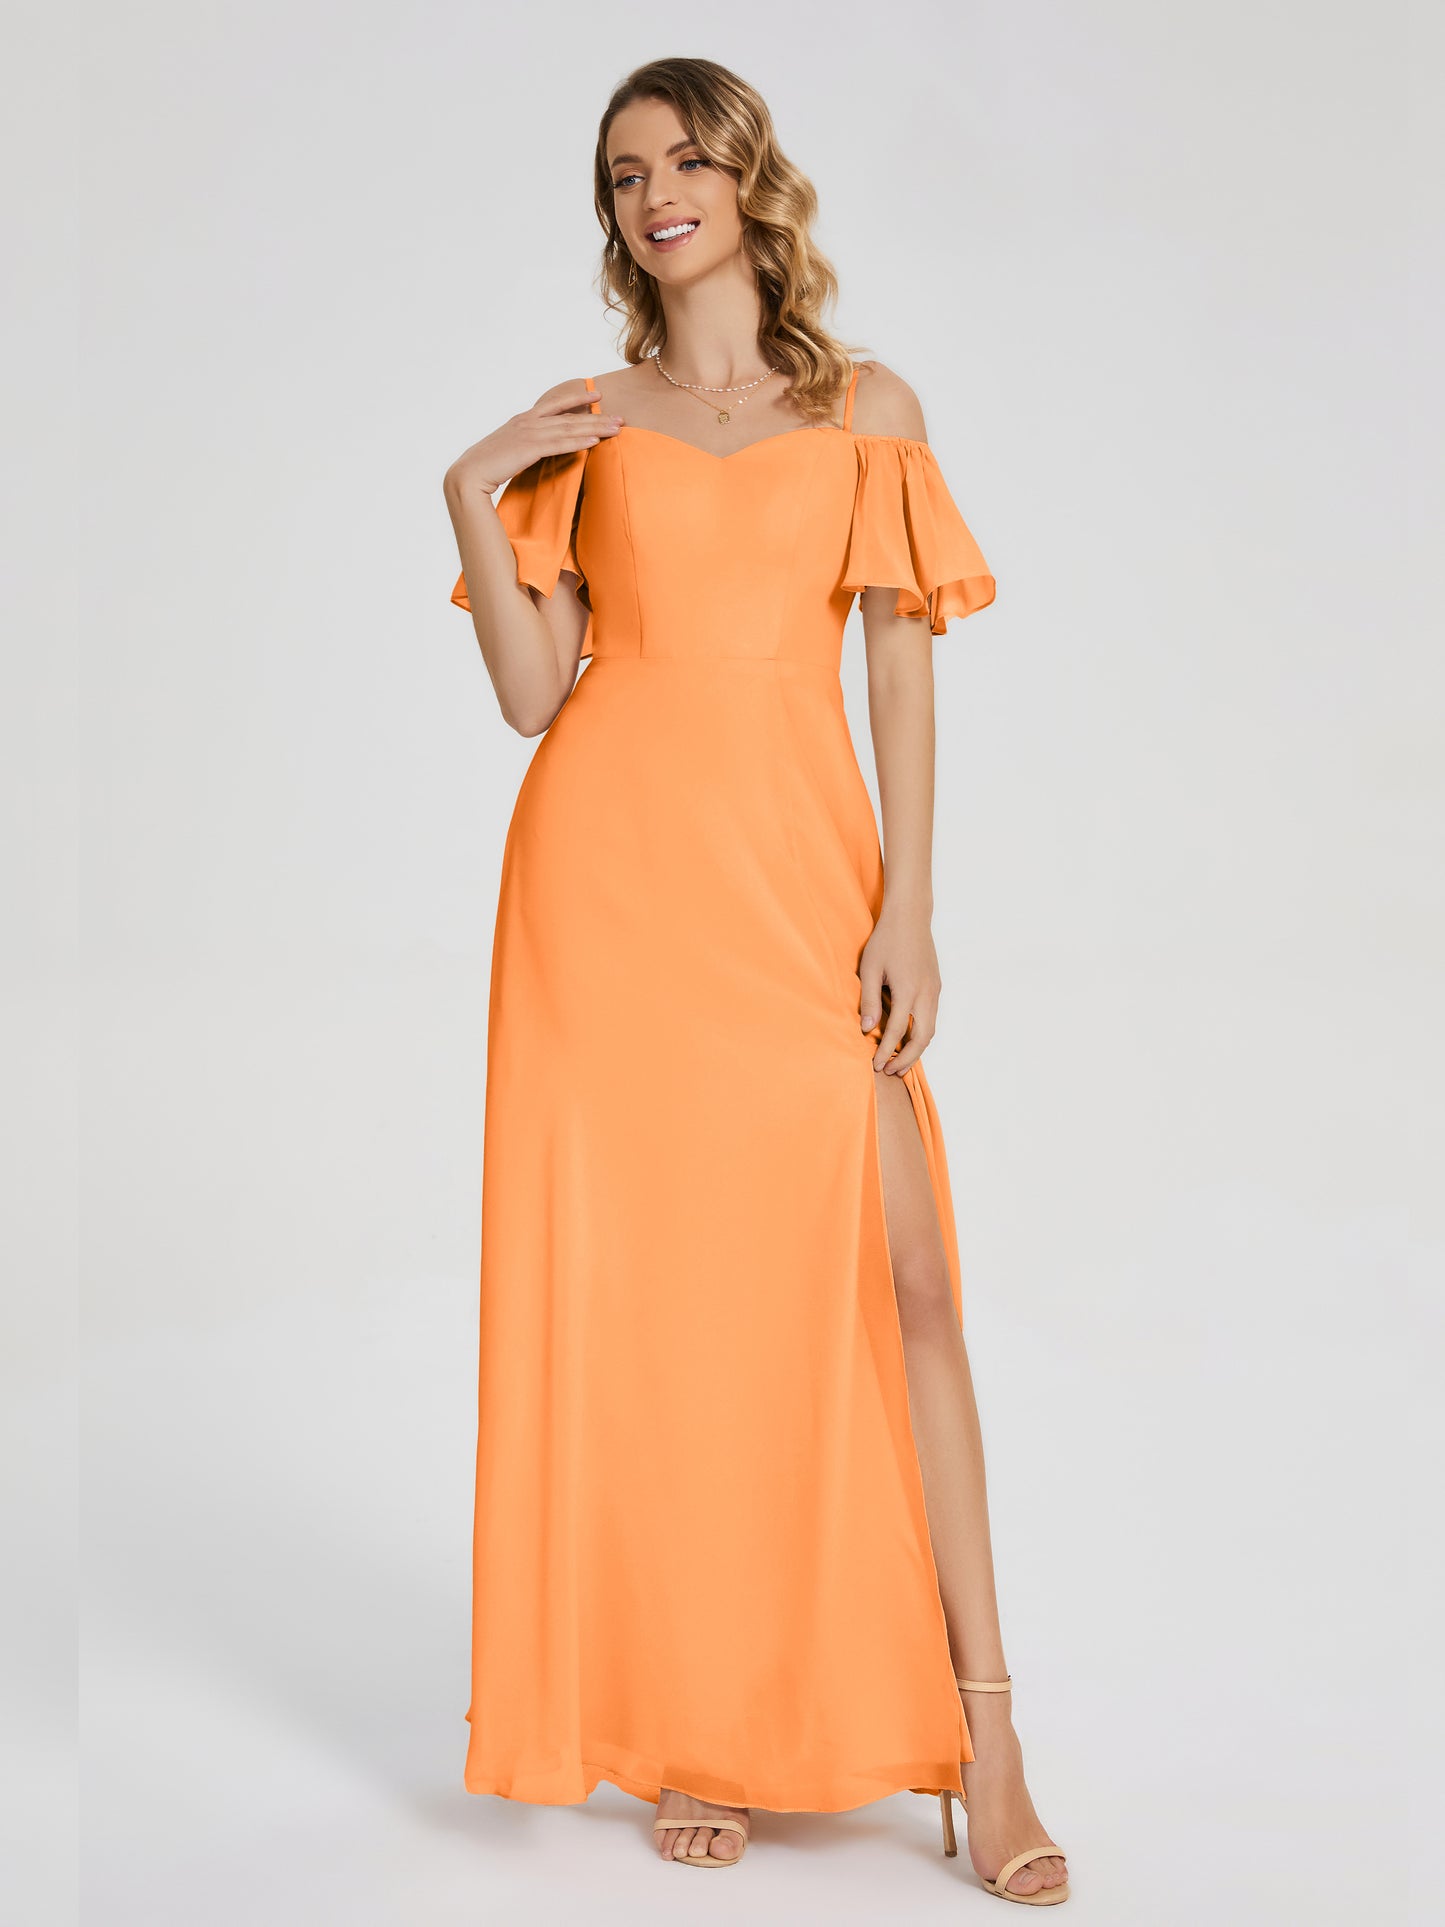 Adelaide A-line Off the Shoulder Chiffon Bridesmaid Dress with Silt